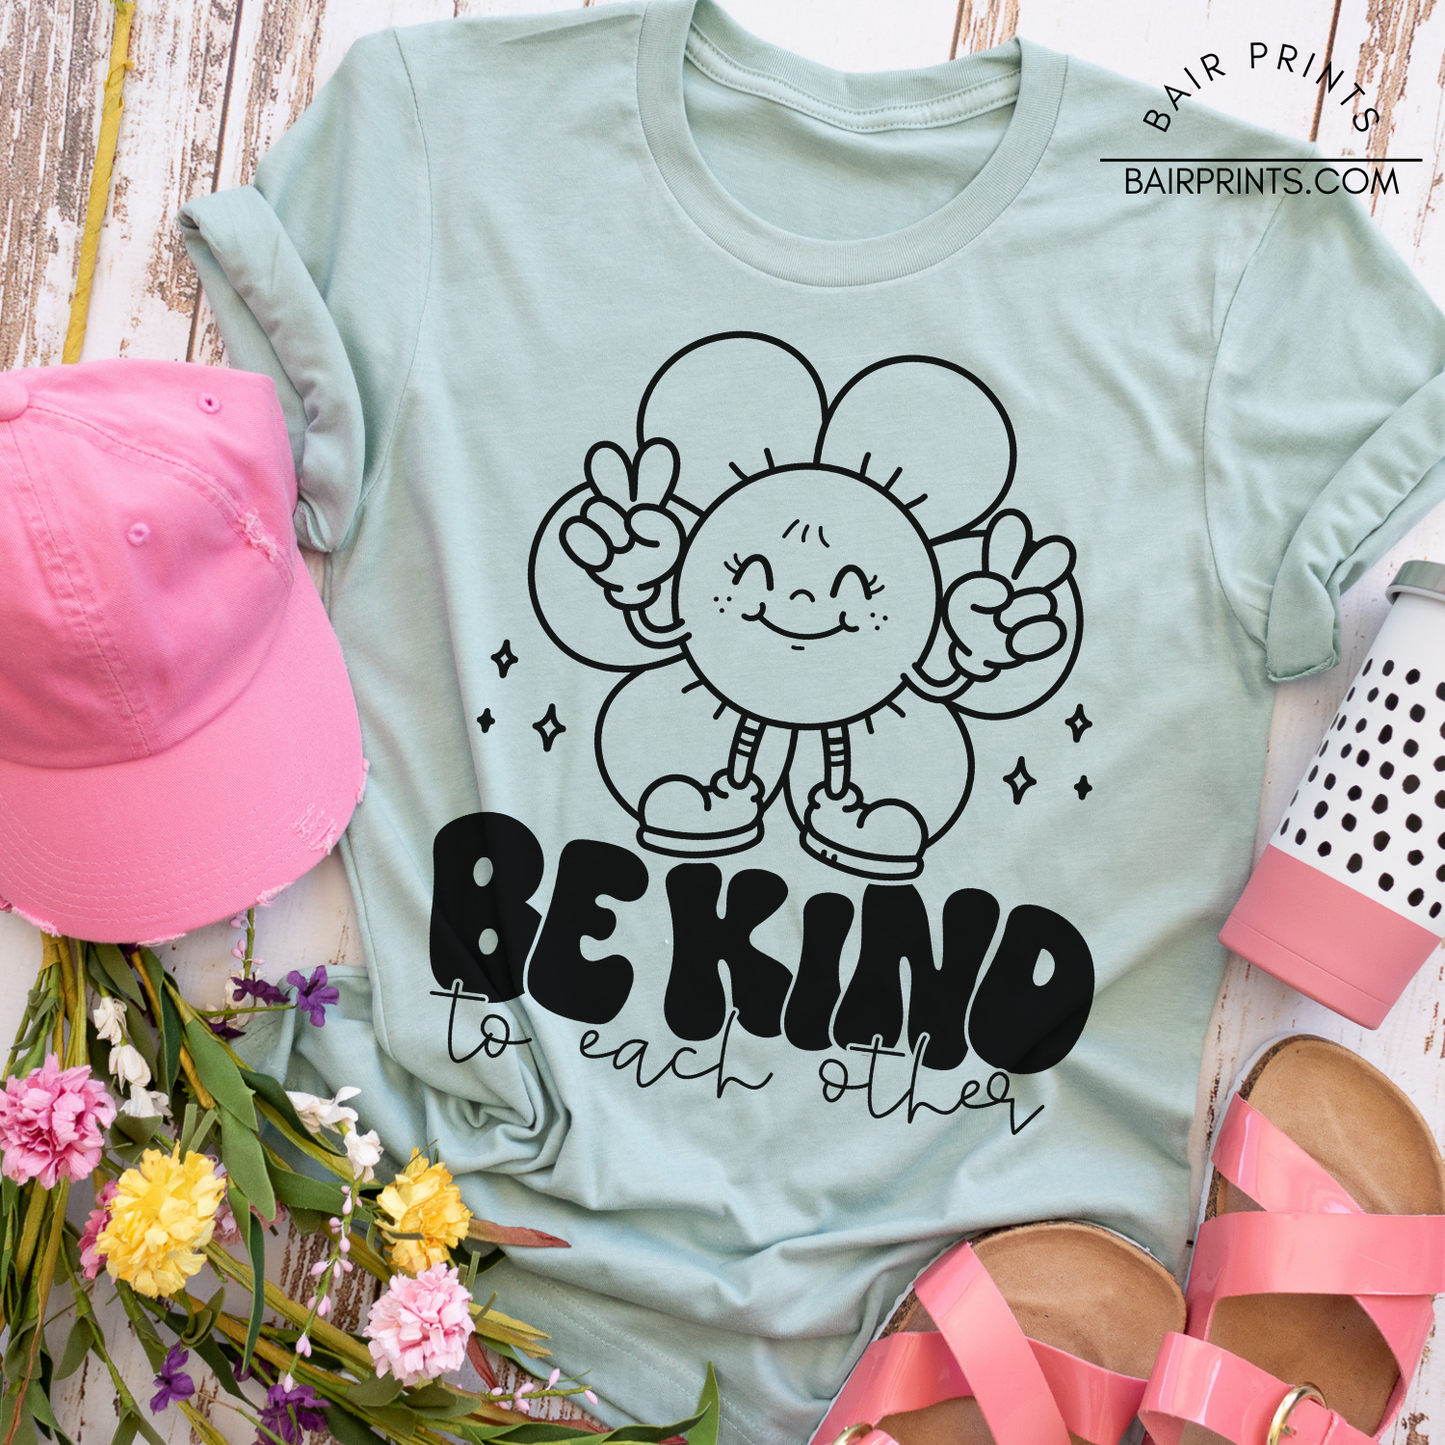 Be Kind to Each Other Screen Printed Tee